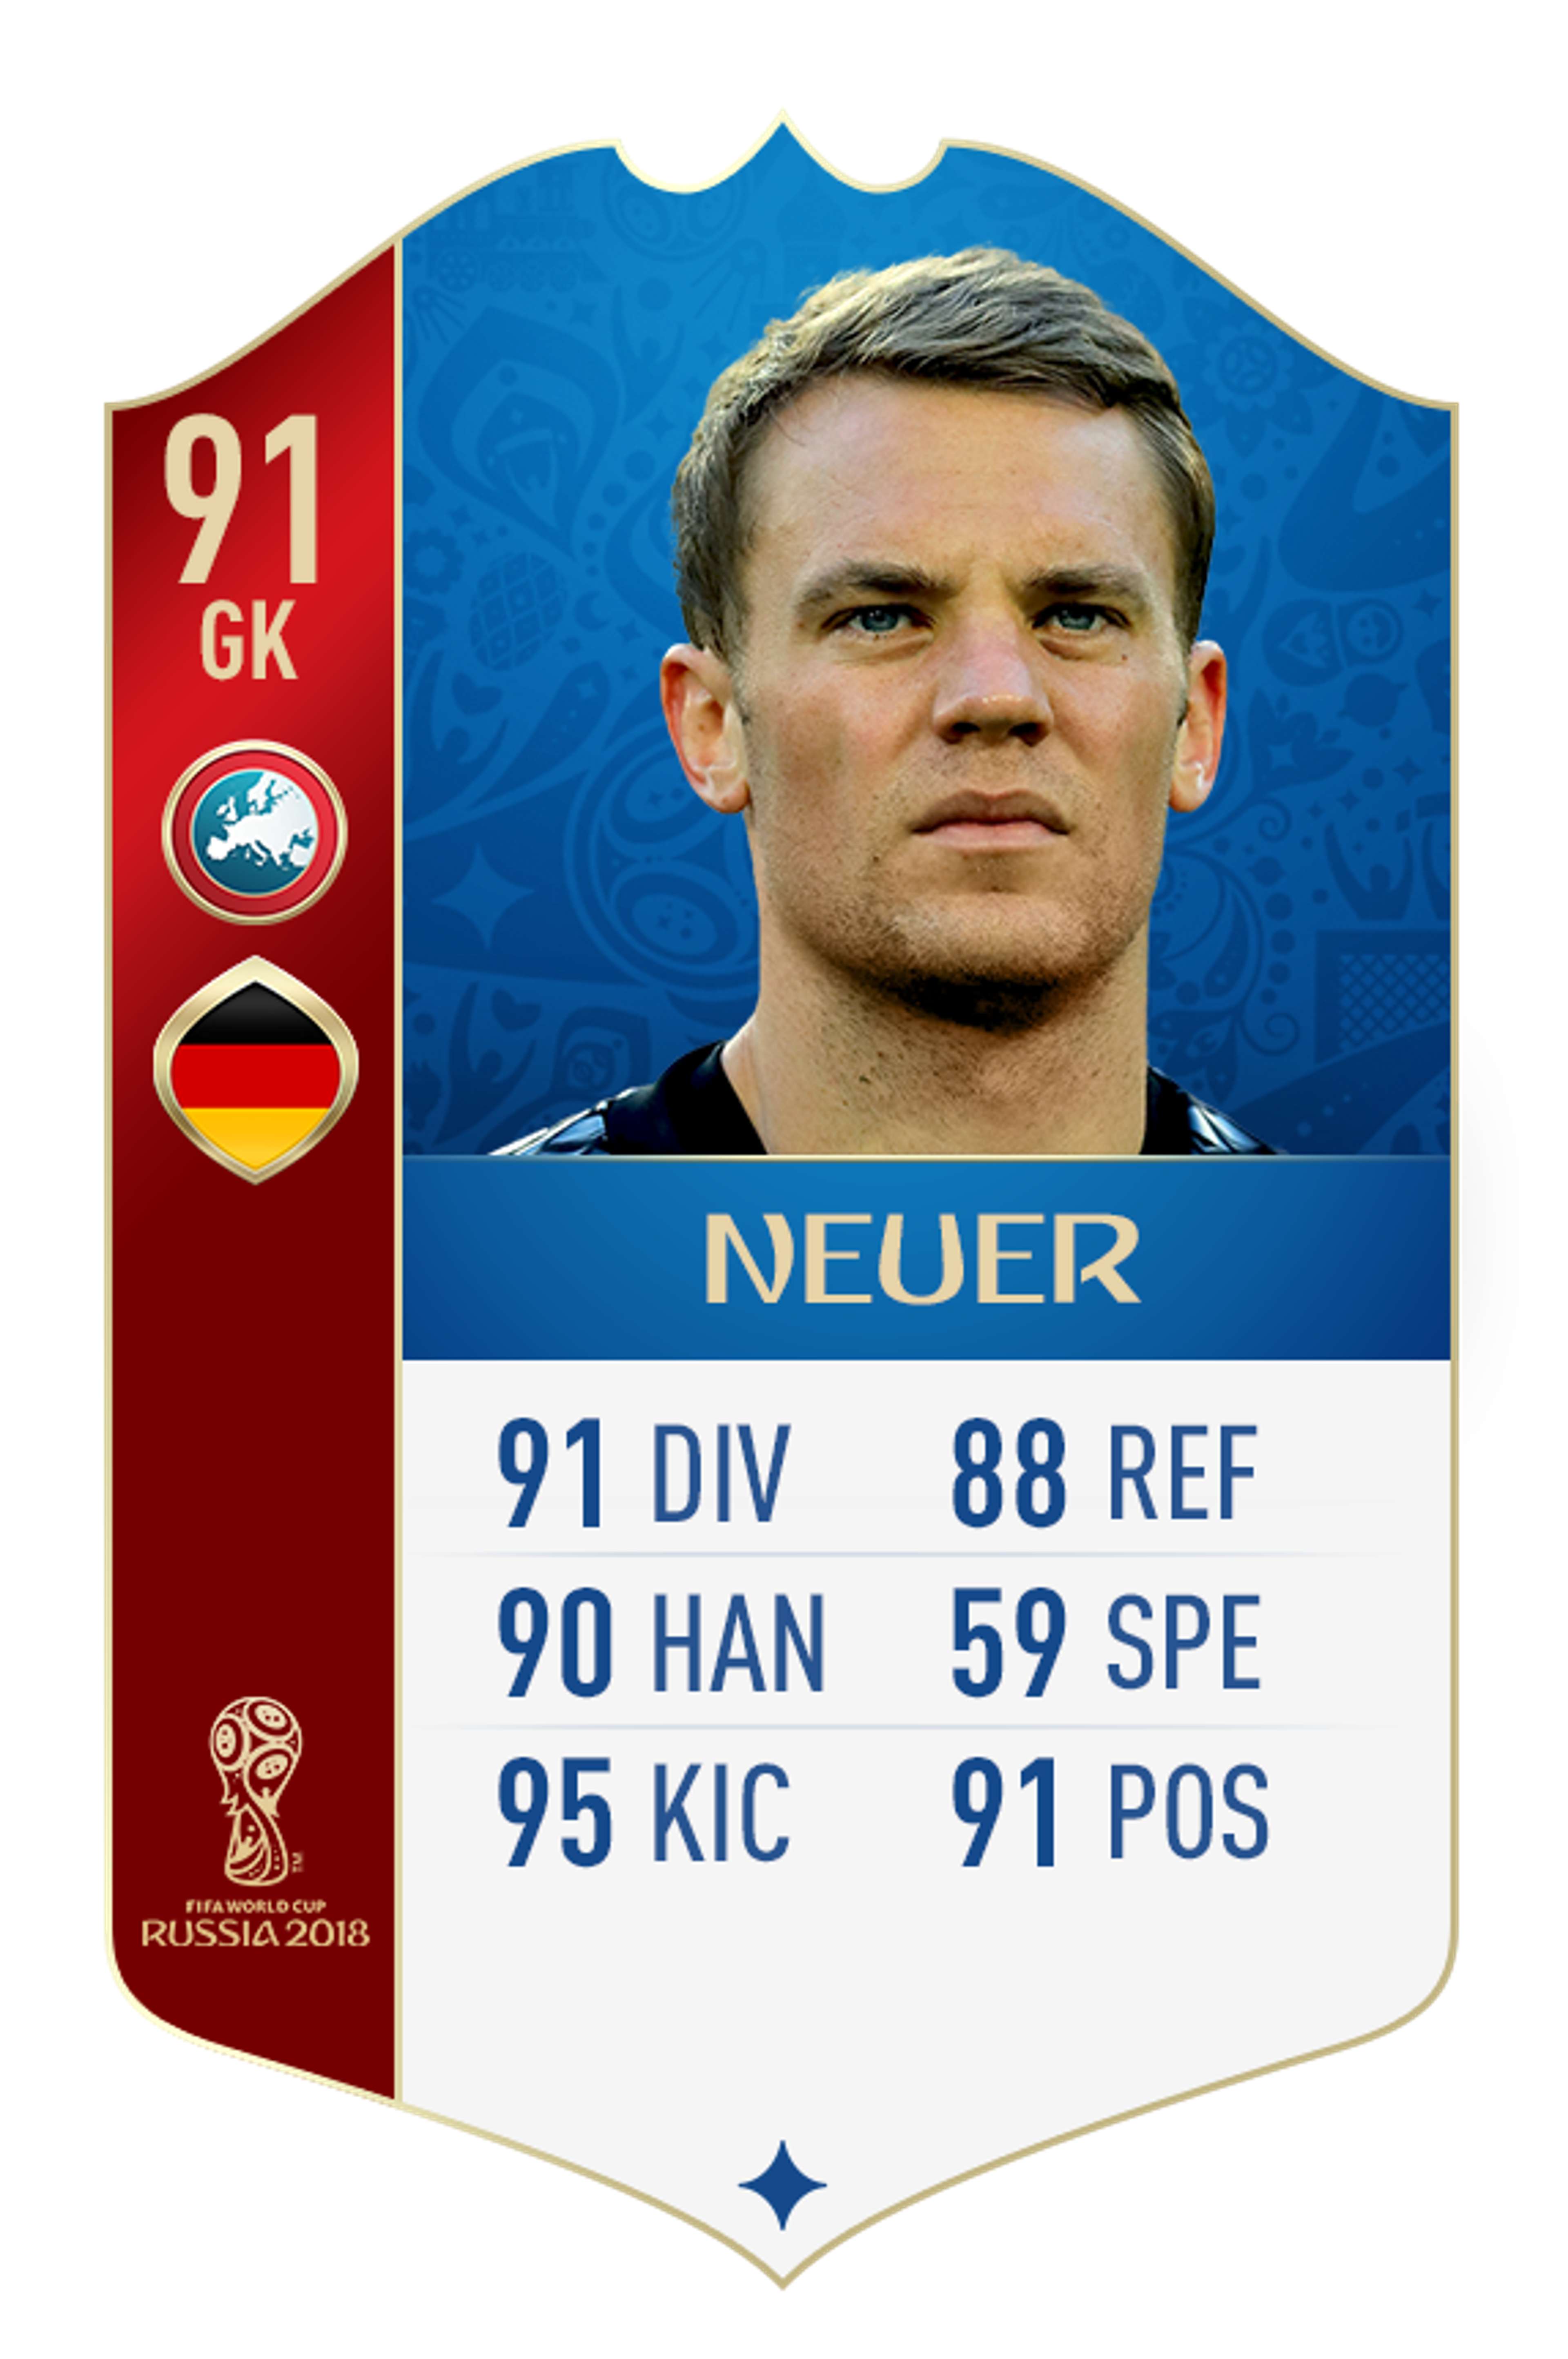 Manuel Neuer FIFA 18 World Cup rating